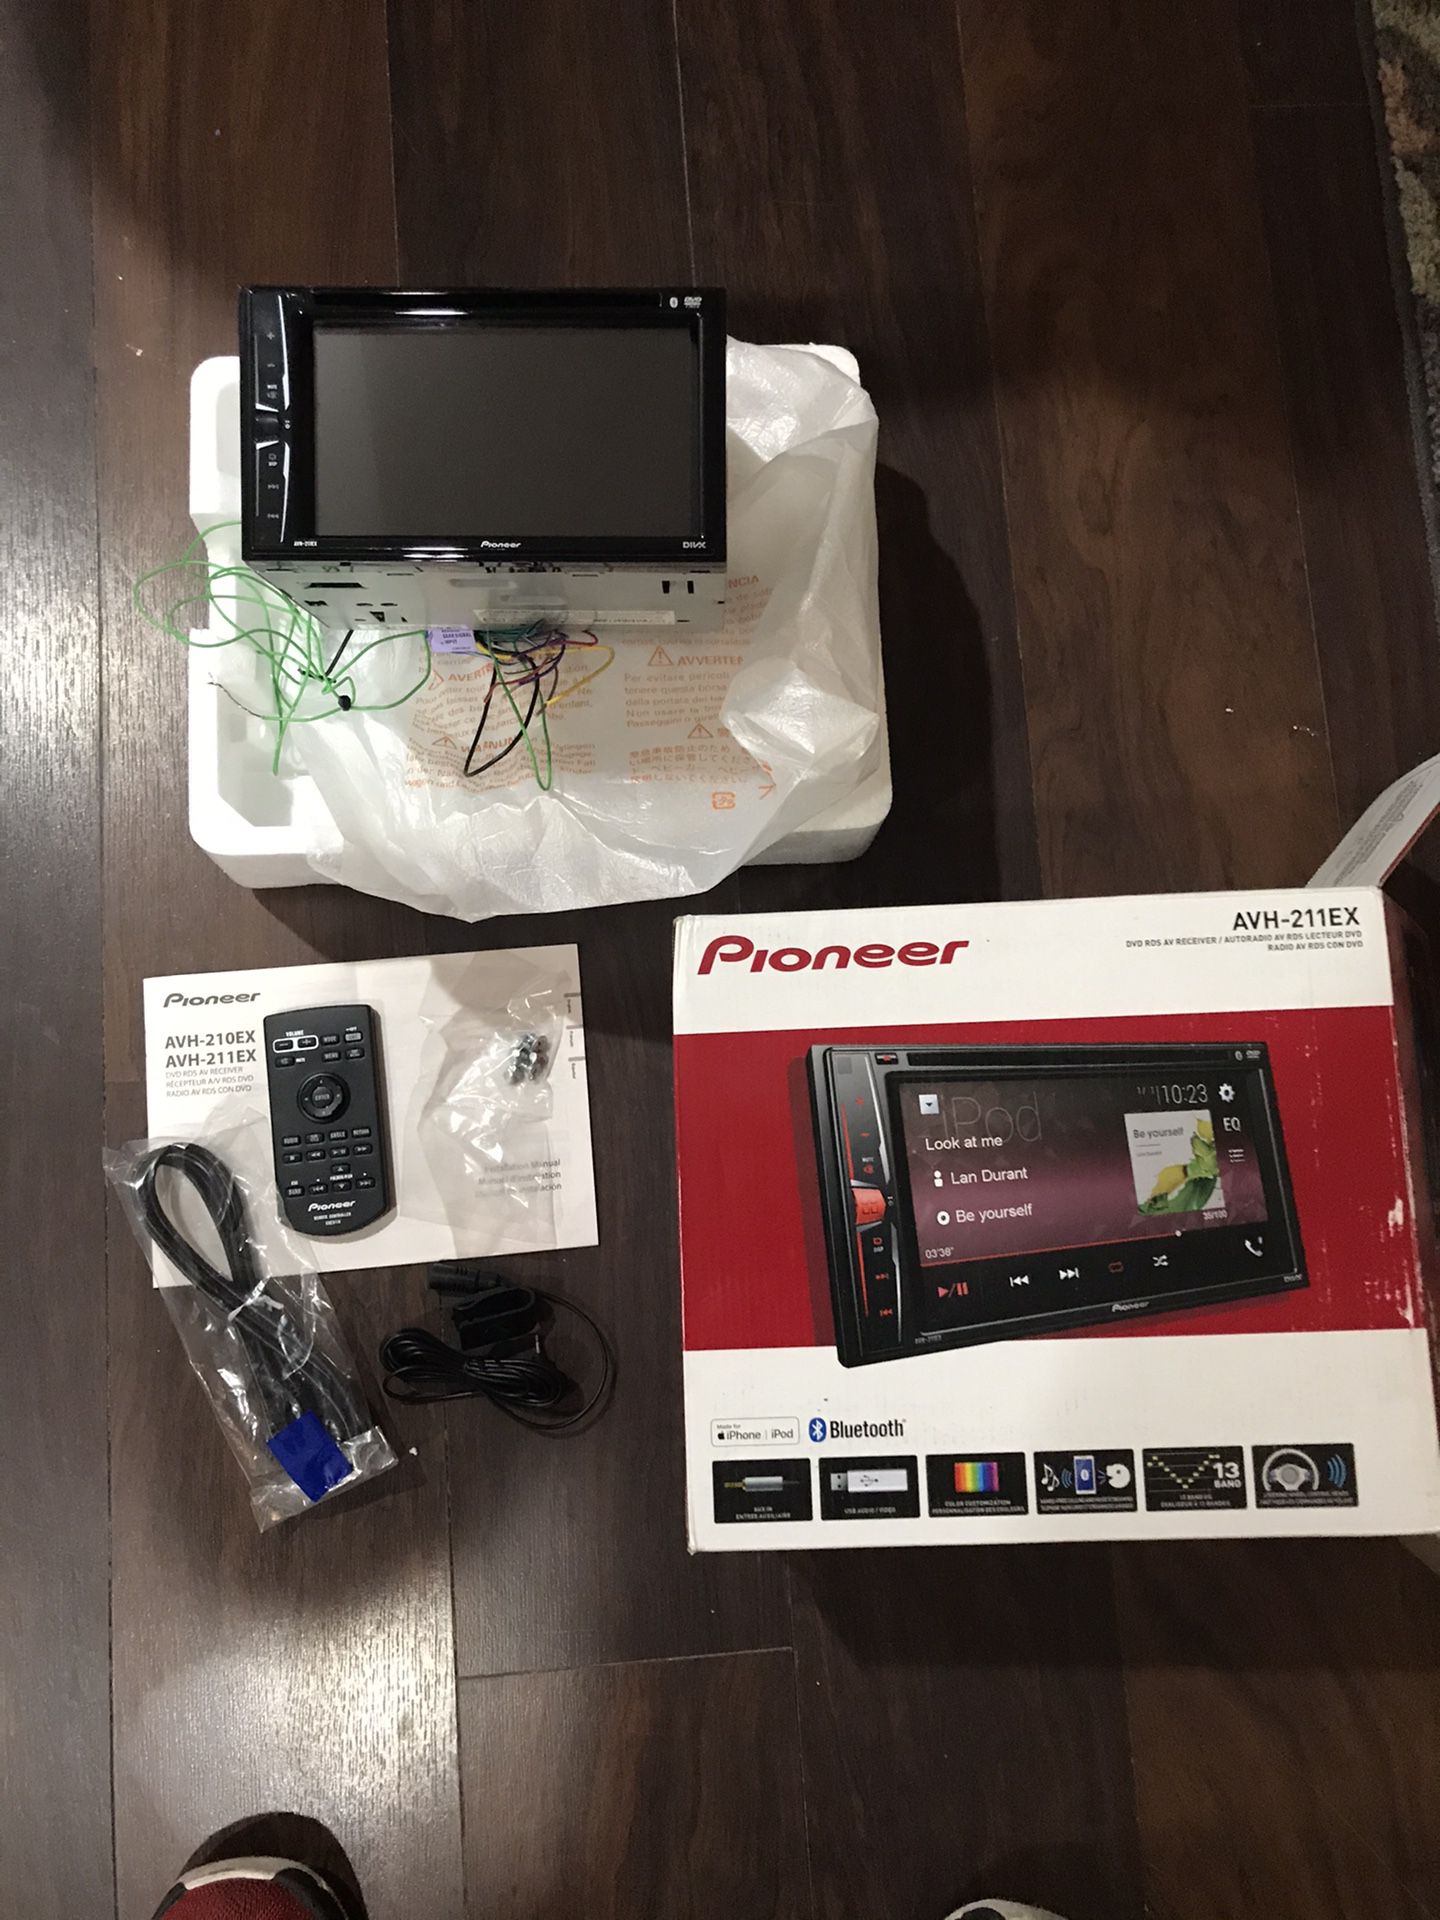 Pioneer AVH-211ex dual din touch screen